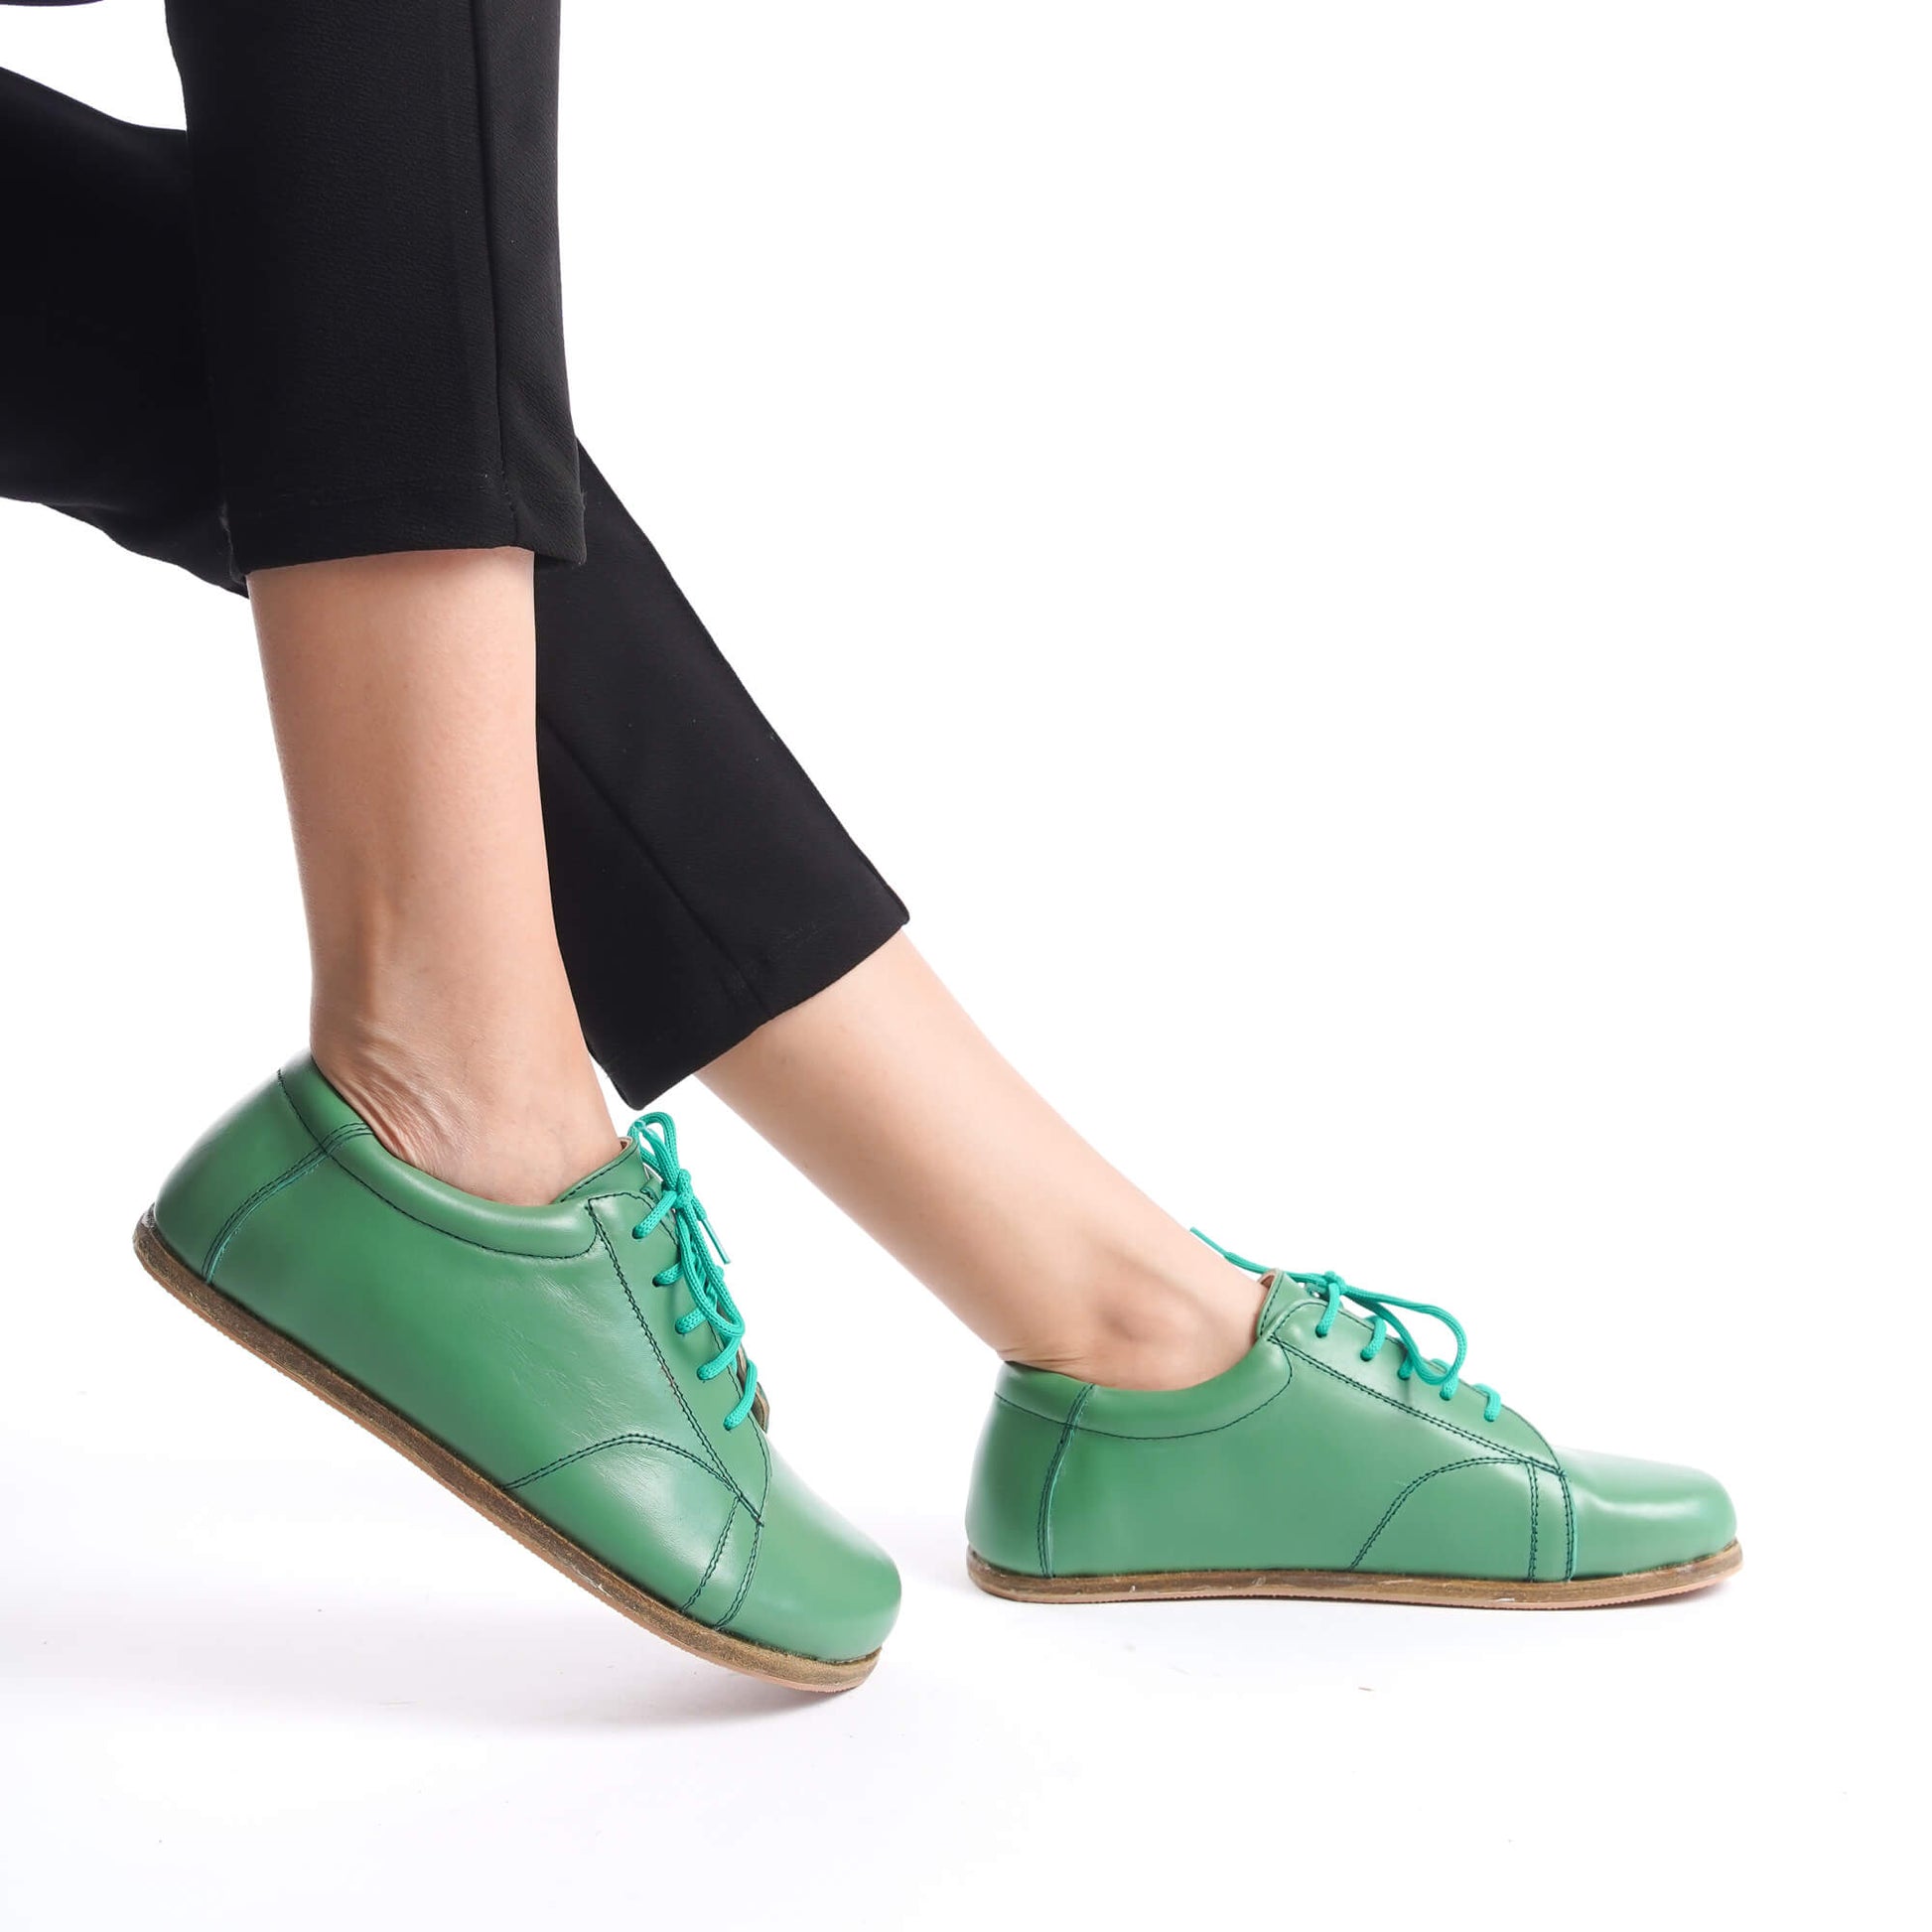 Close-up of Lydia Leather Barefoot Women Sneakers in green with turquoise laces, highlighting their elegant design and comfortable fit.